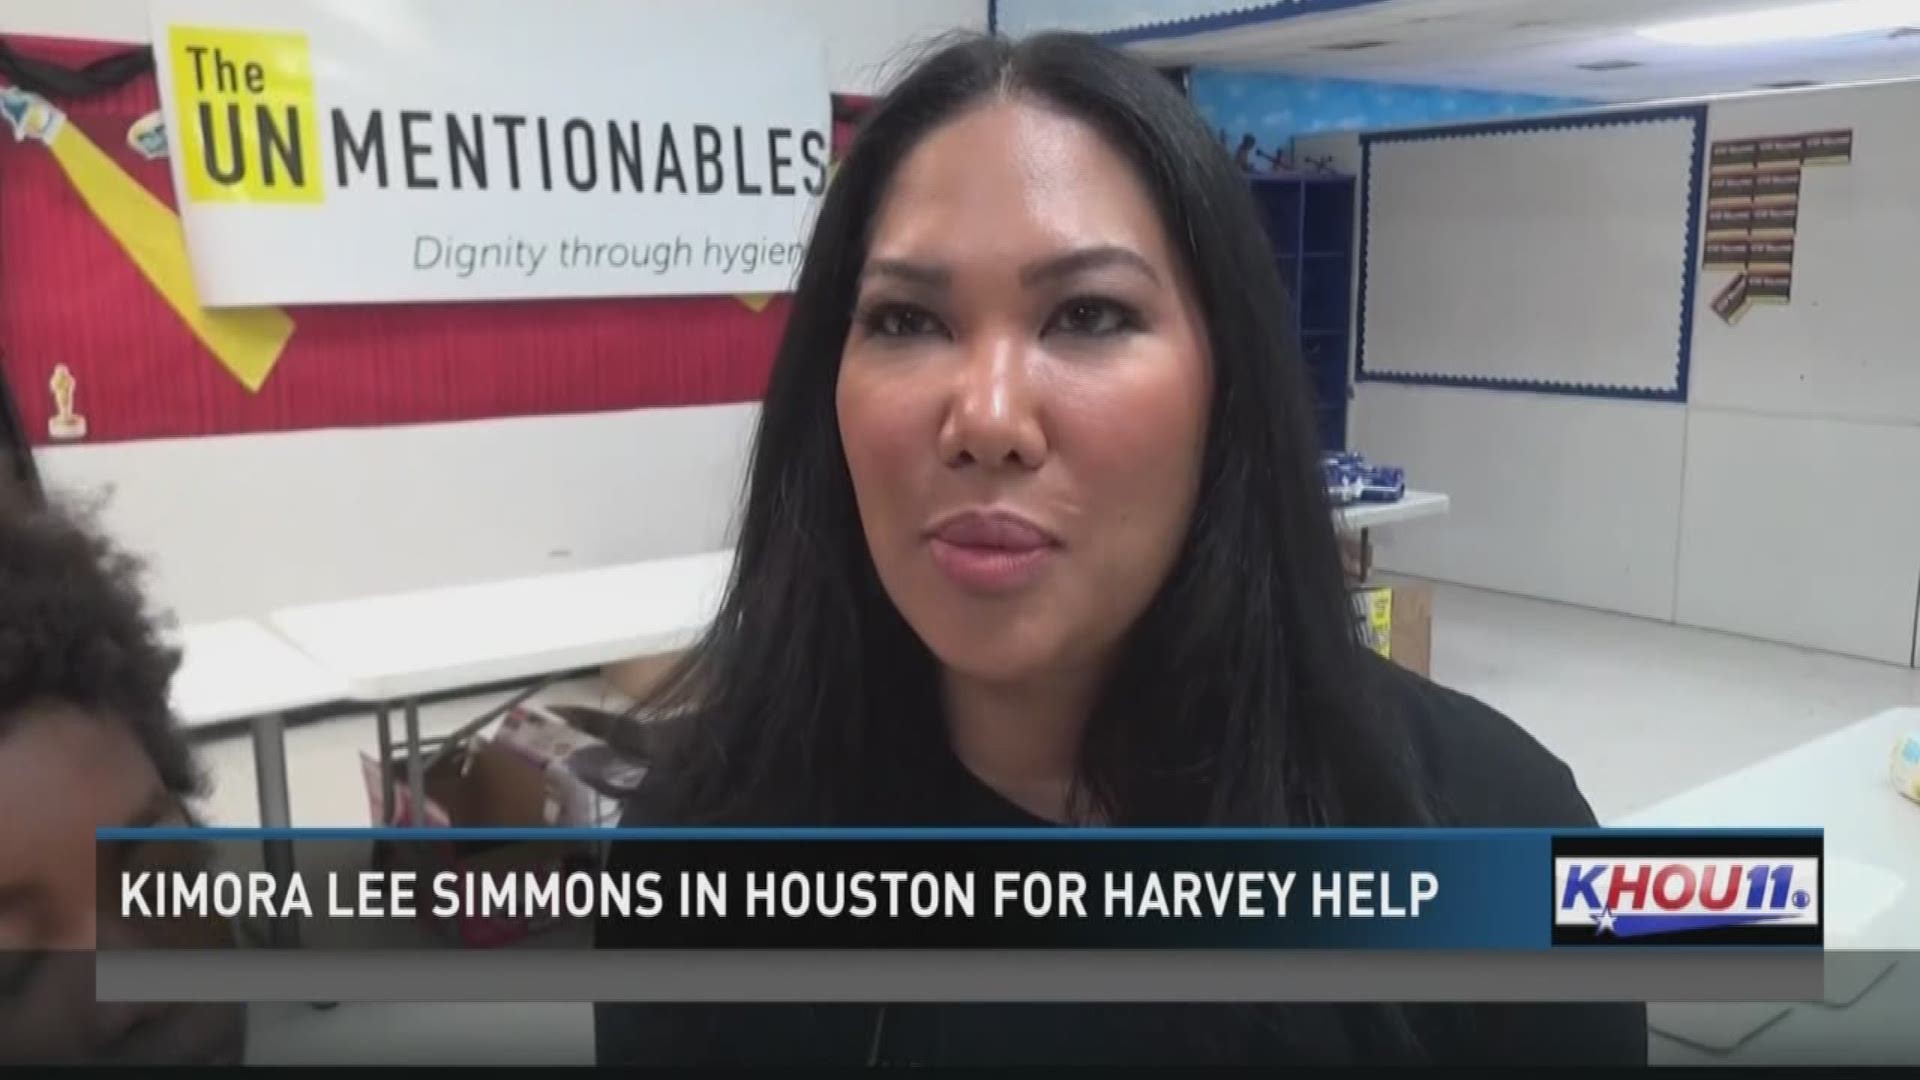 Designer and businesswoman Kimora Lee Simmons came to Houston to help distribute supplies to victims of Hurricane Harvey.